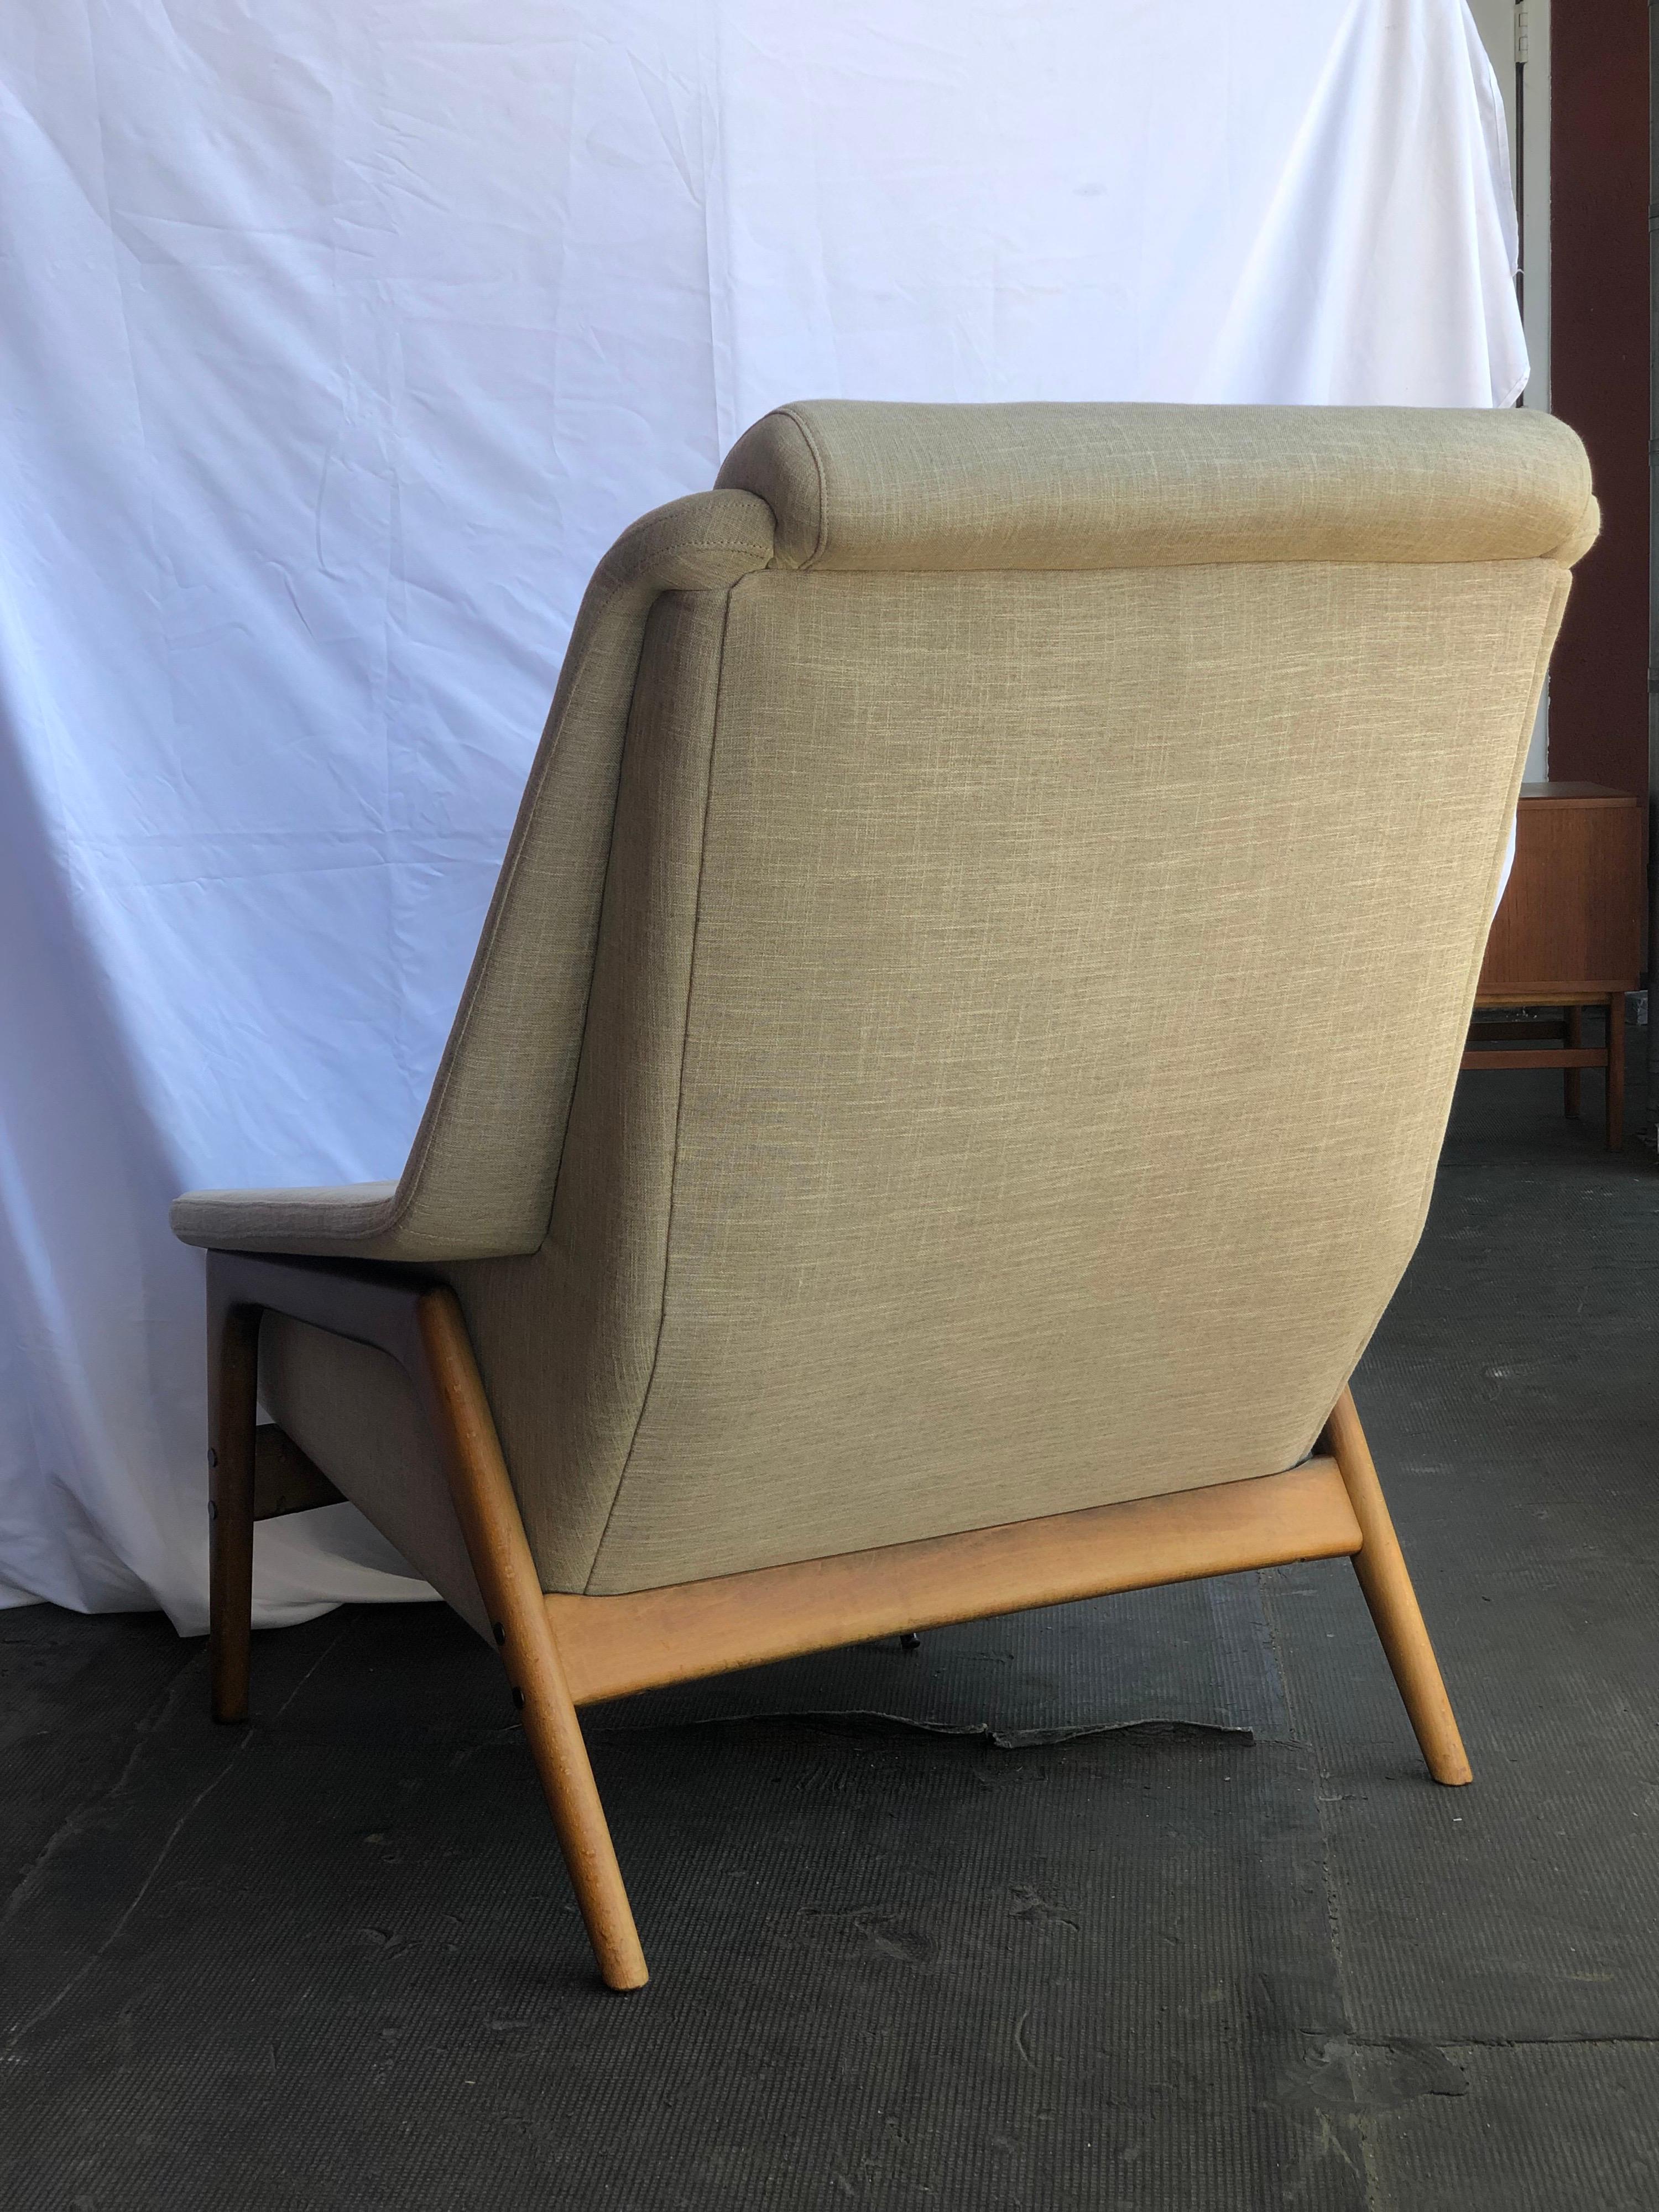 Designed by Folke Ohlsson for the Swedish manufacturer Dux, this lounge chair offers a supremely comfortable seat within an exposed teak frame. 

Measures: W. 33 in; H. 33.5 in; D. 39 in.
W. 83.82 cm; H. 85.09 cm; D. 99.06 cm.
Seat H. 17